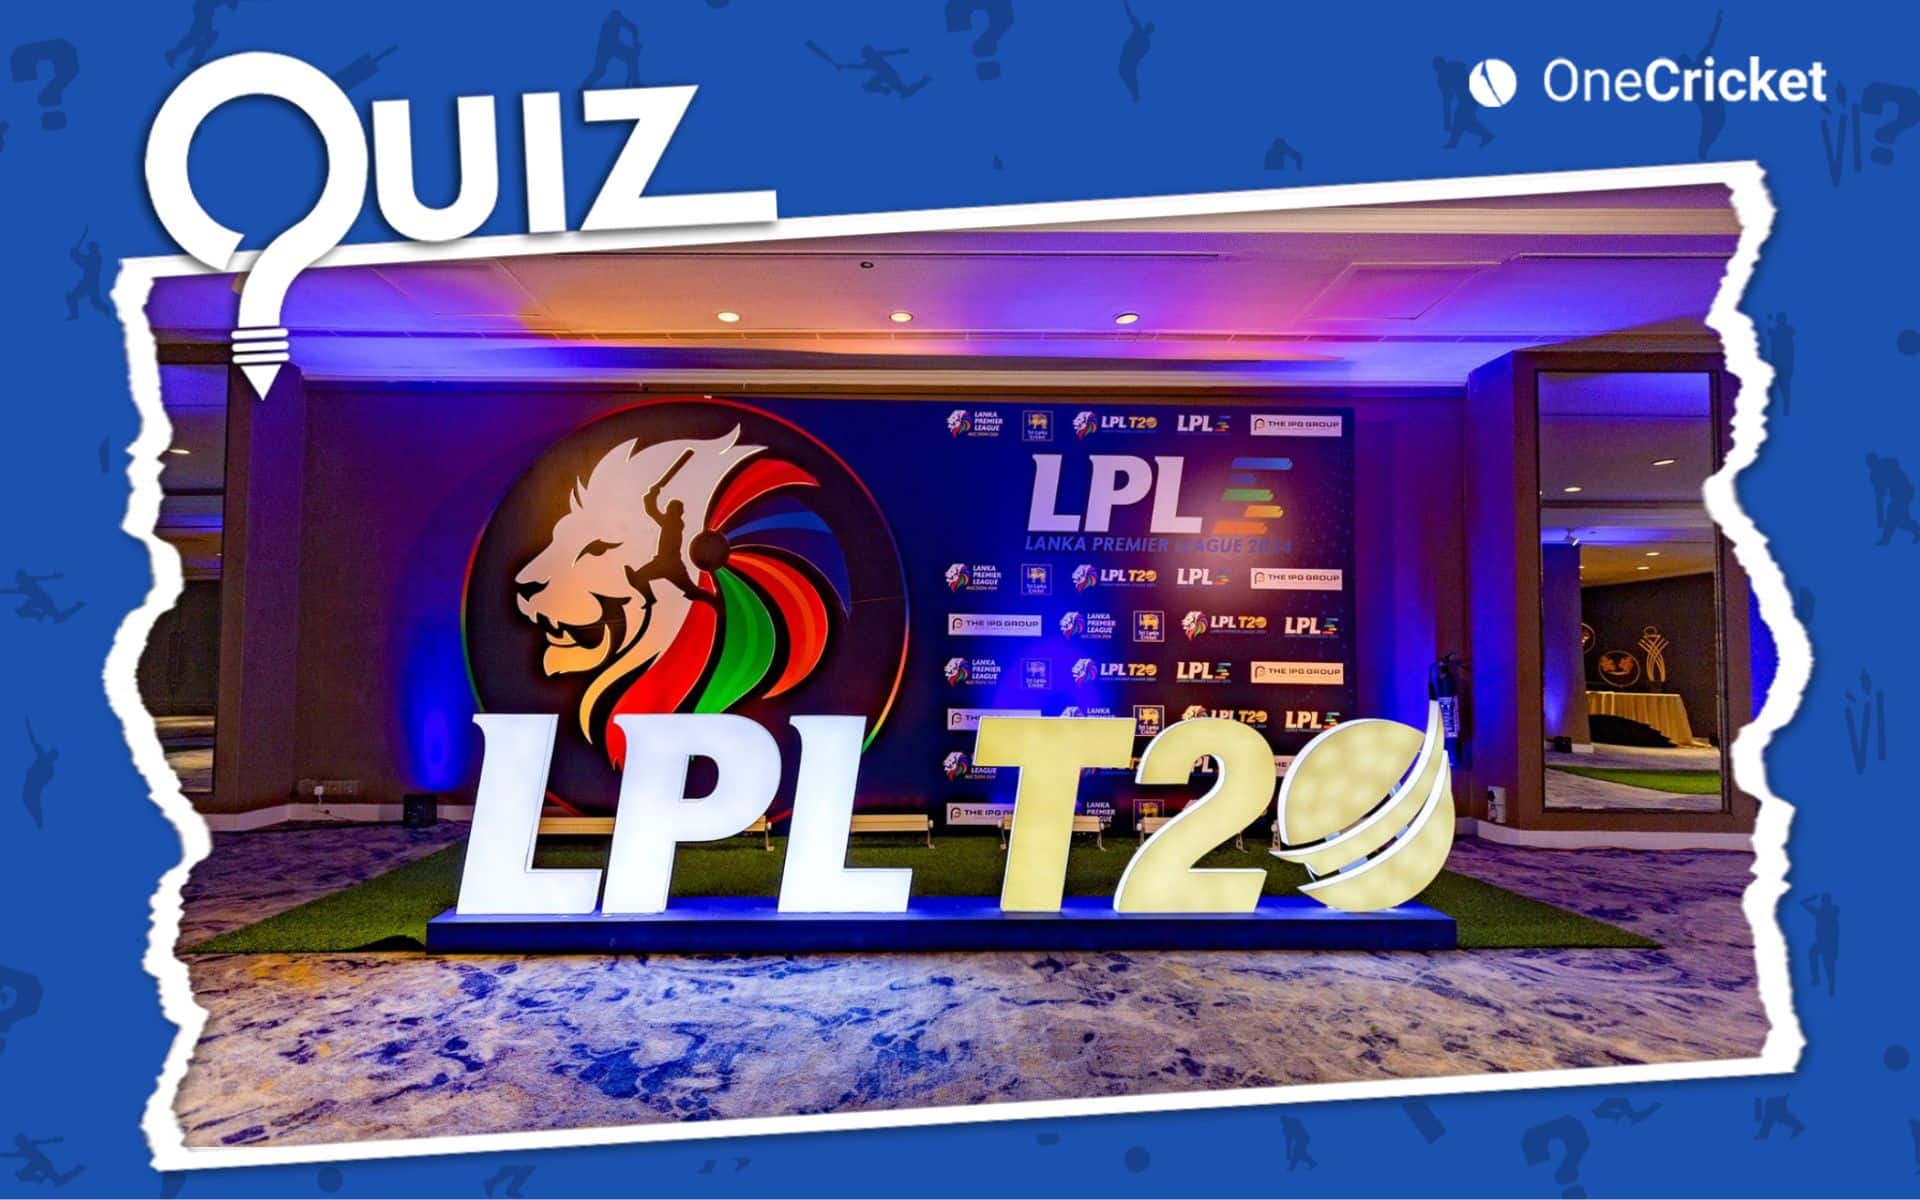 Can You Answer These Questions From Lanka Premier League? Test Your Knowledge Here